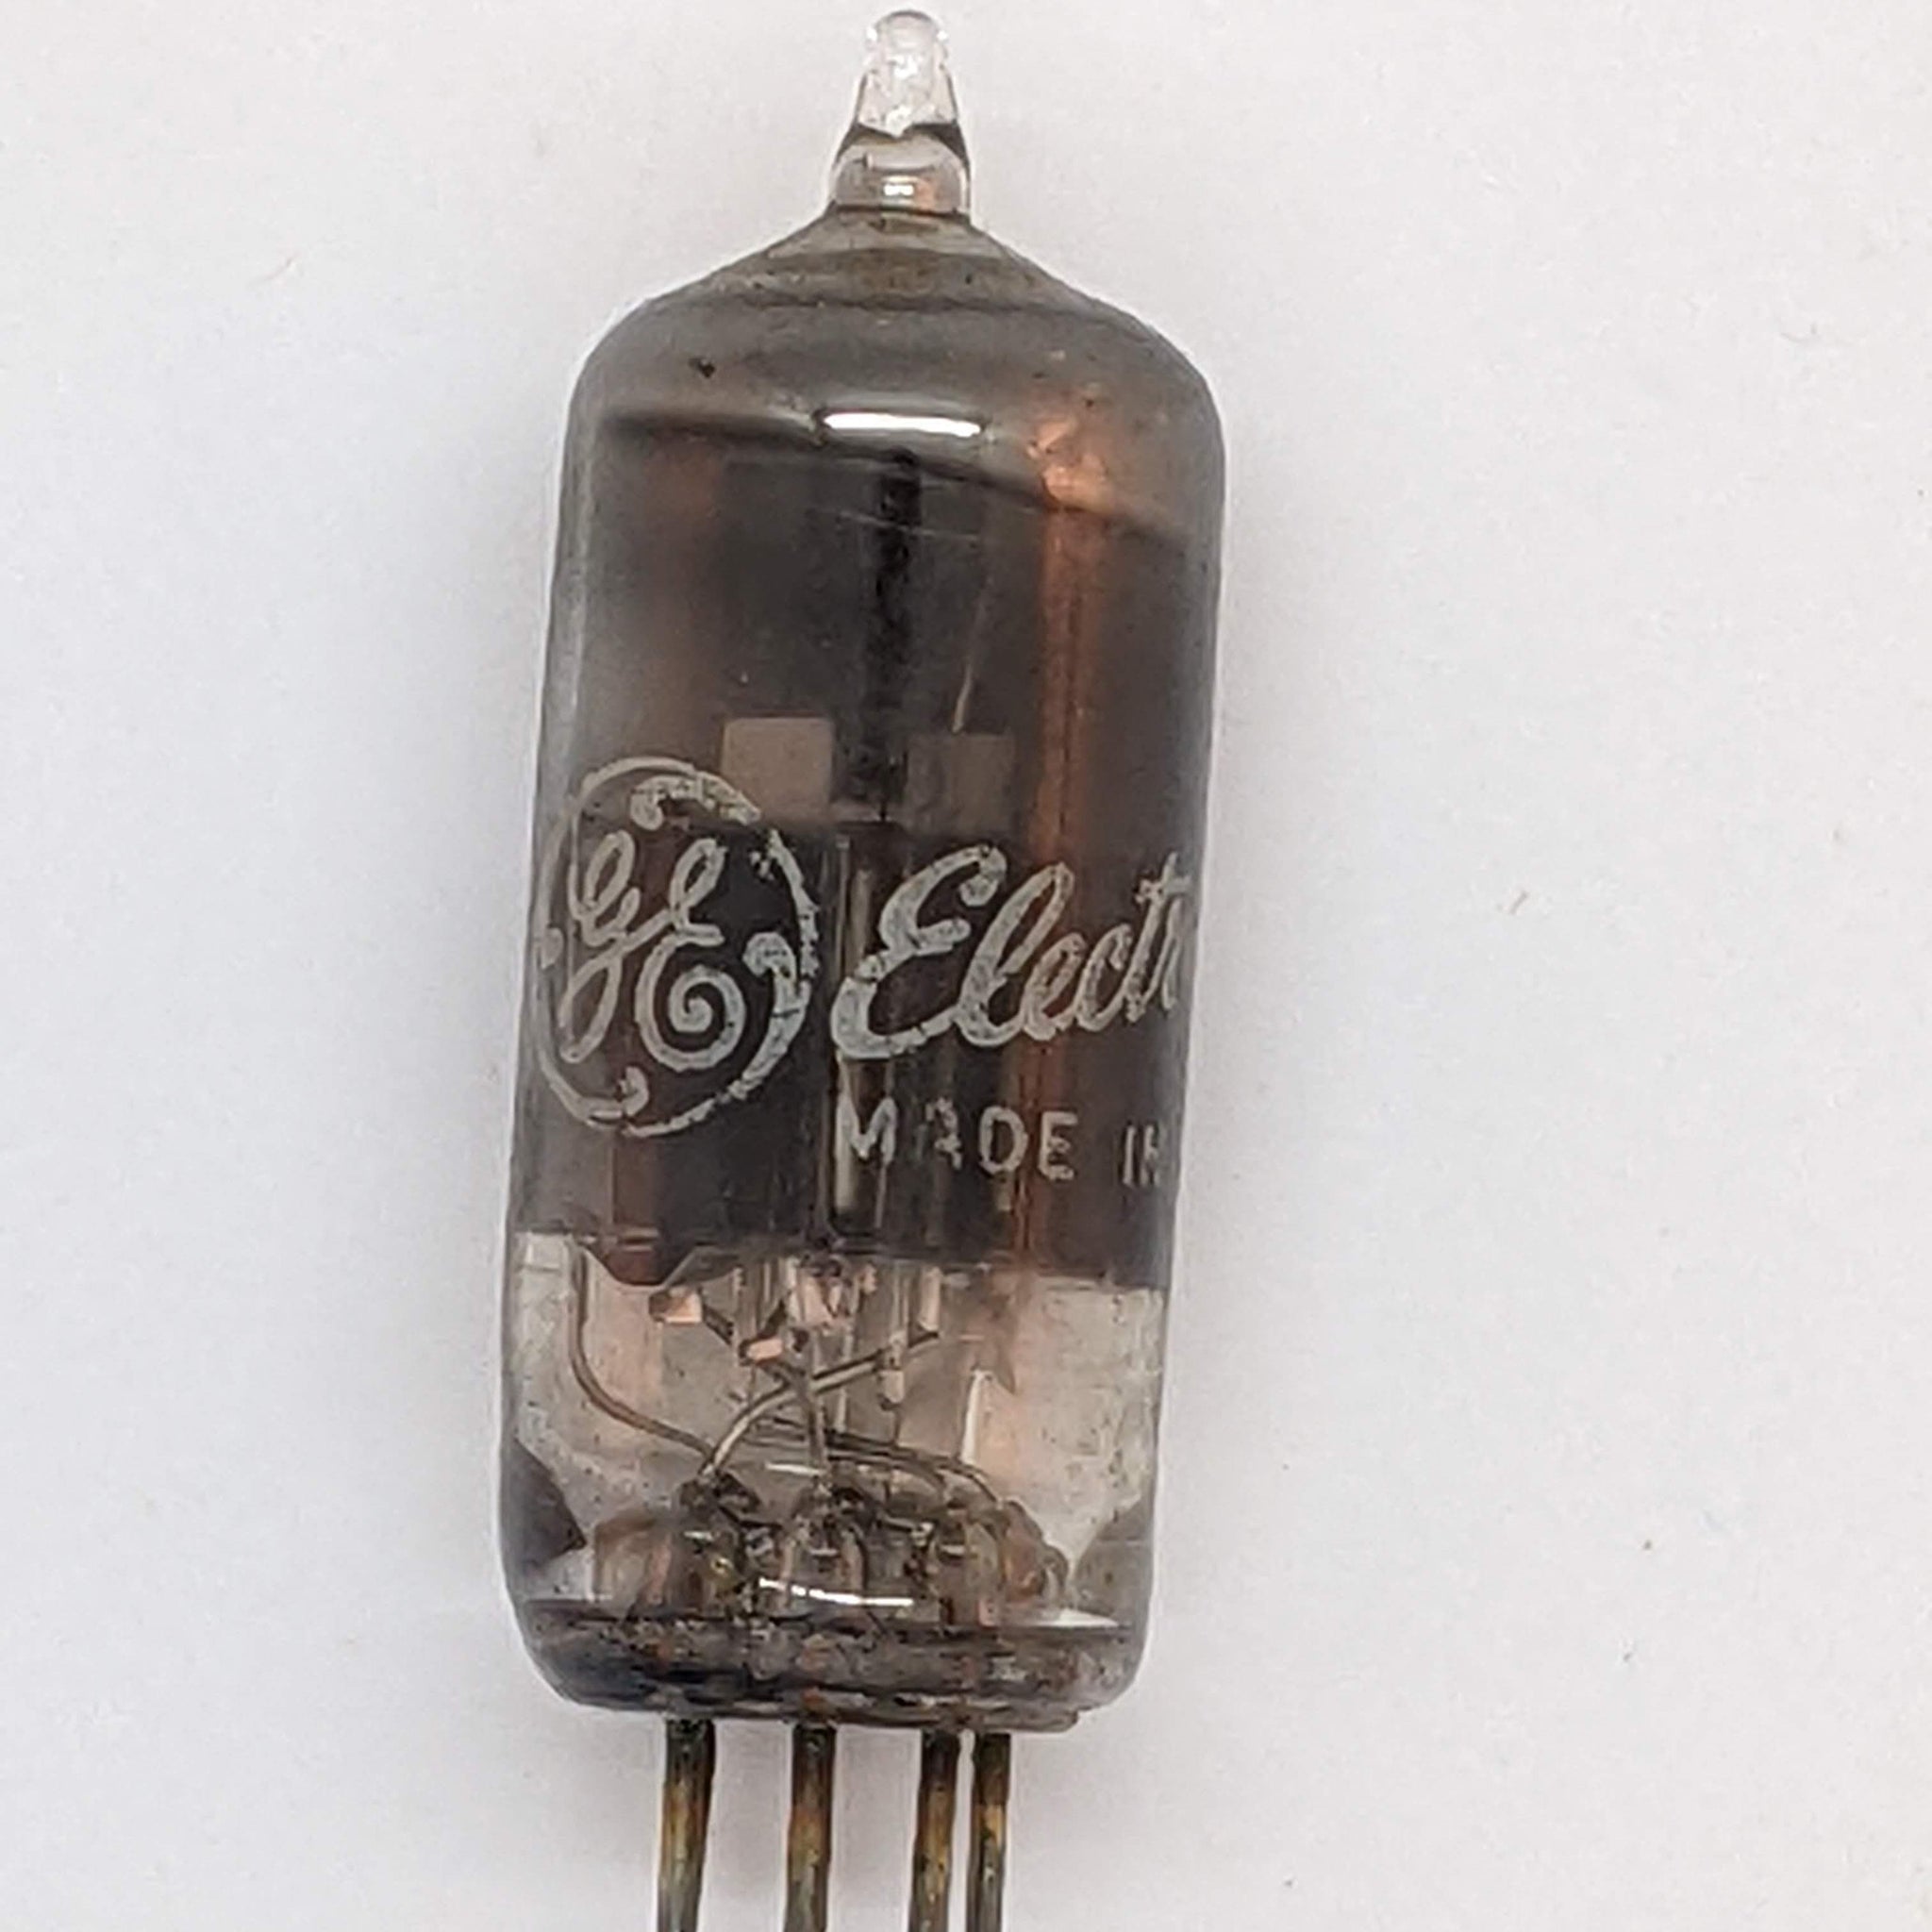 6CB6A Vacuum Tube, Tested Good, Ships Quick From Mississippi